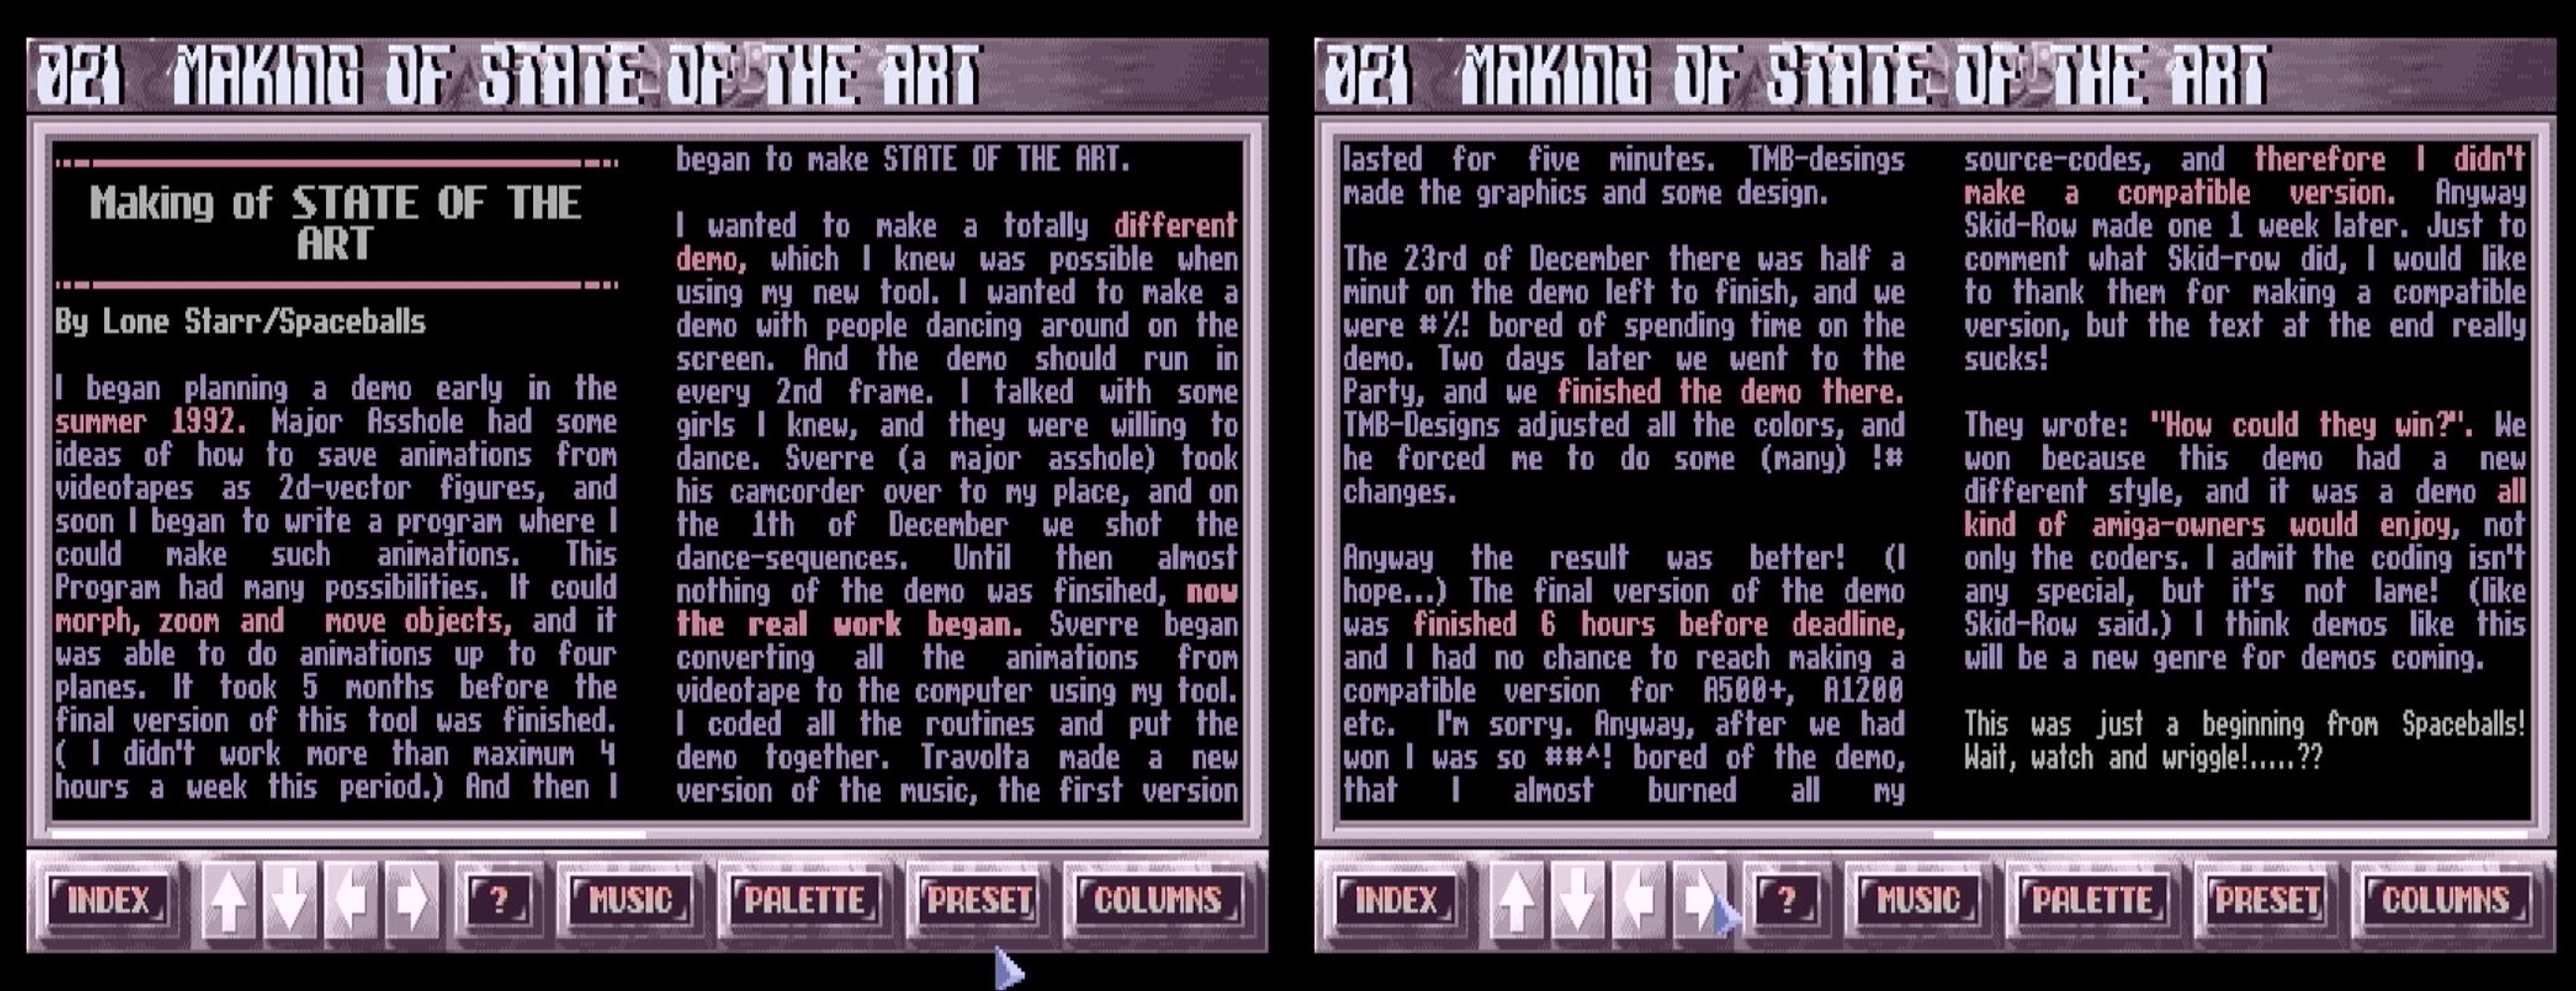 Screenshots of the R.A.W. diskmag that describes the creation of the demo